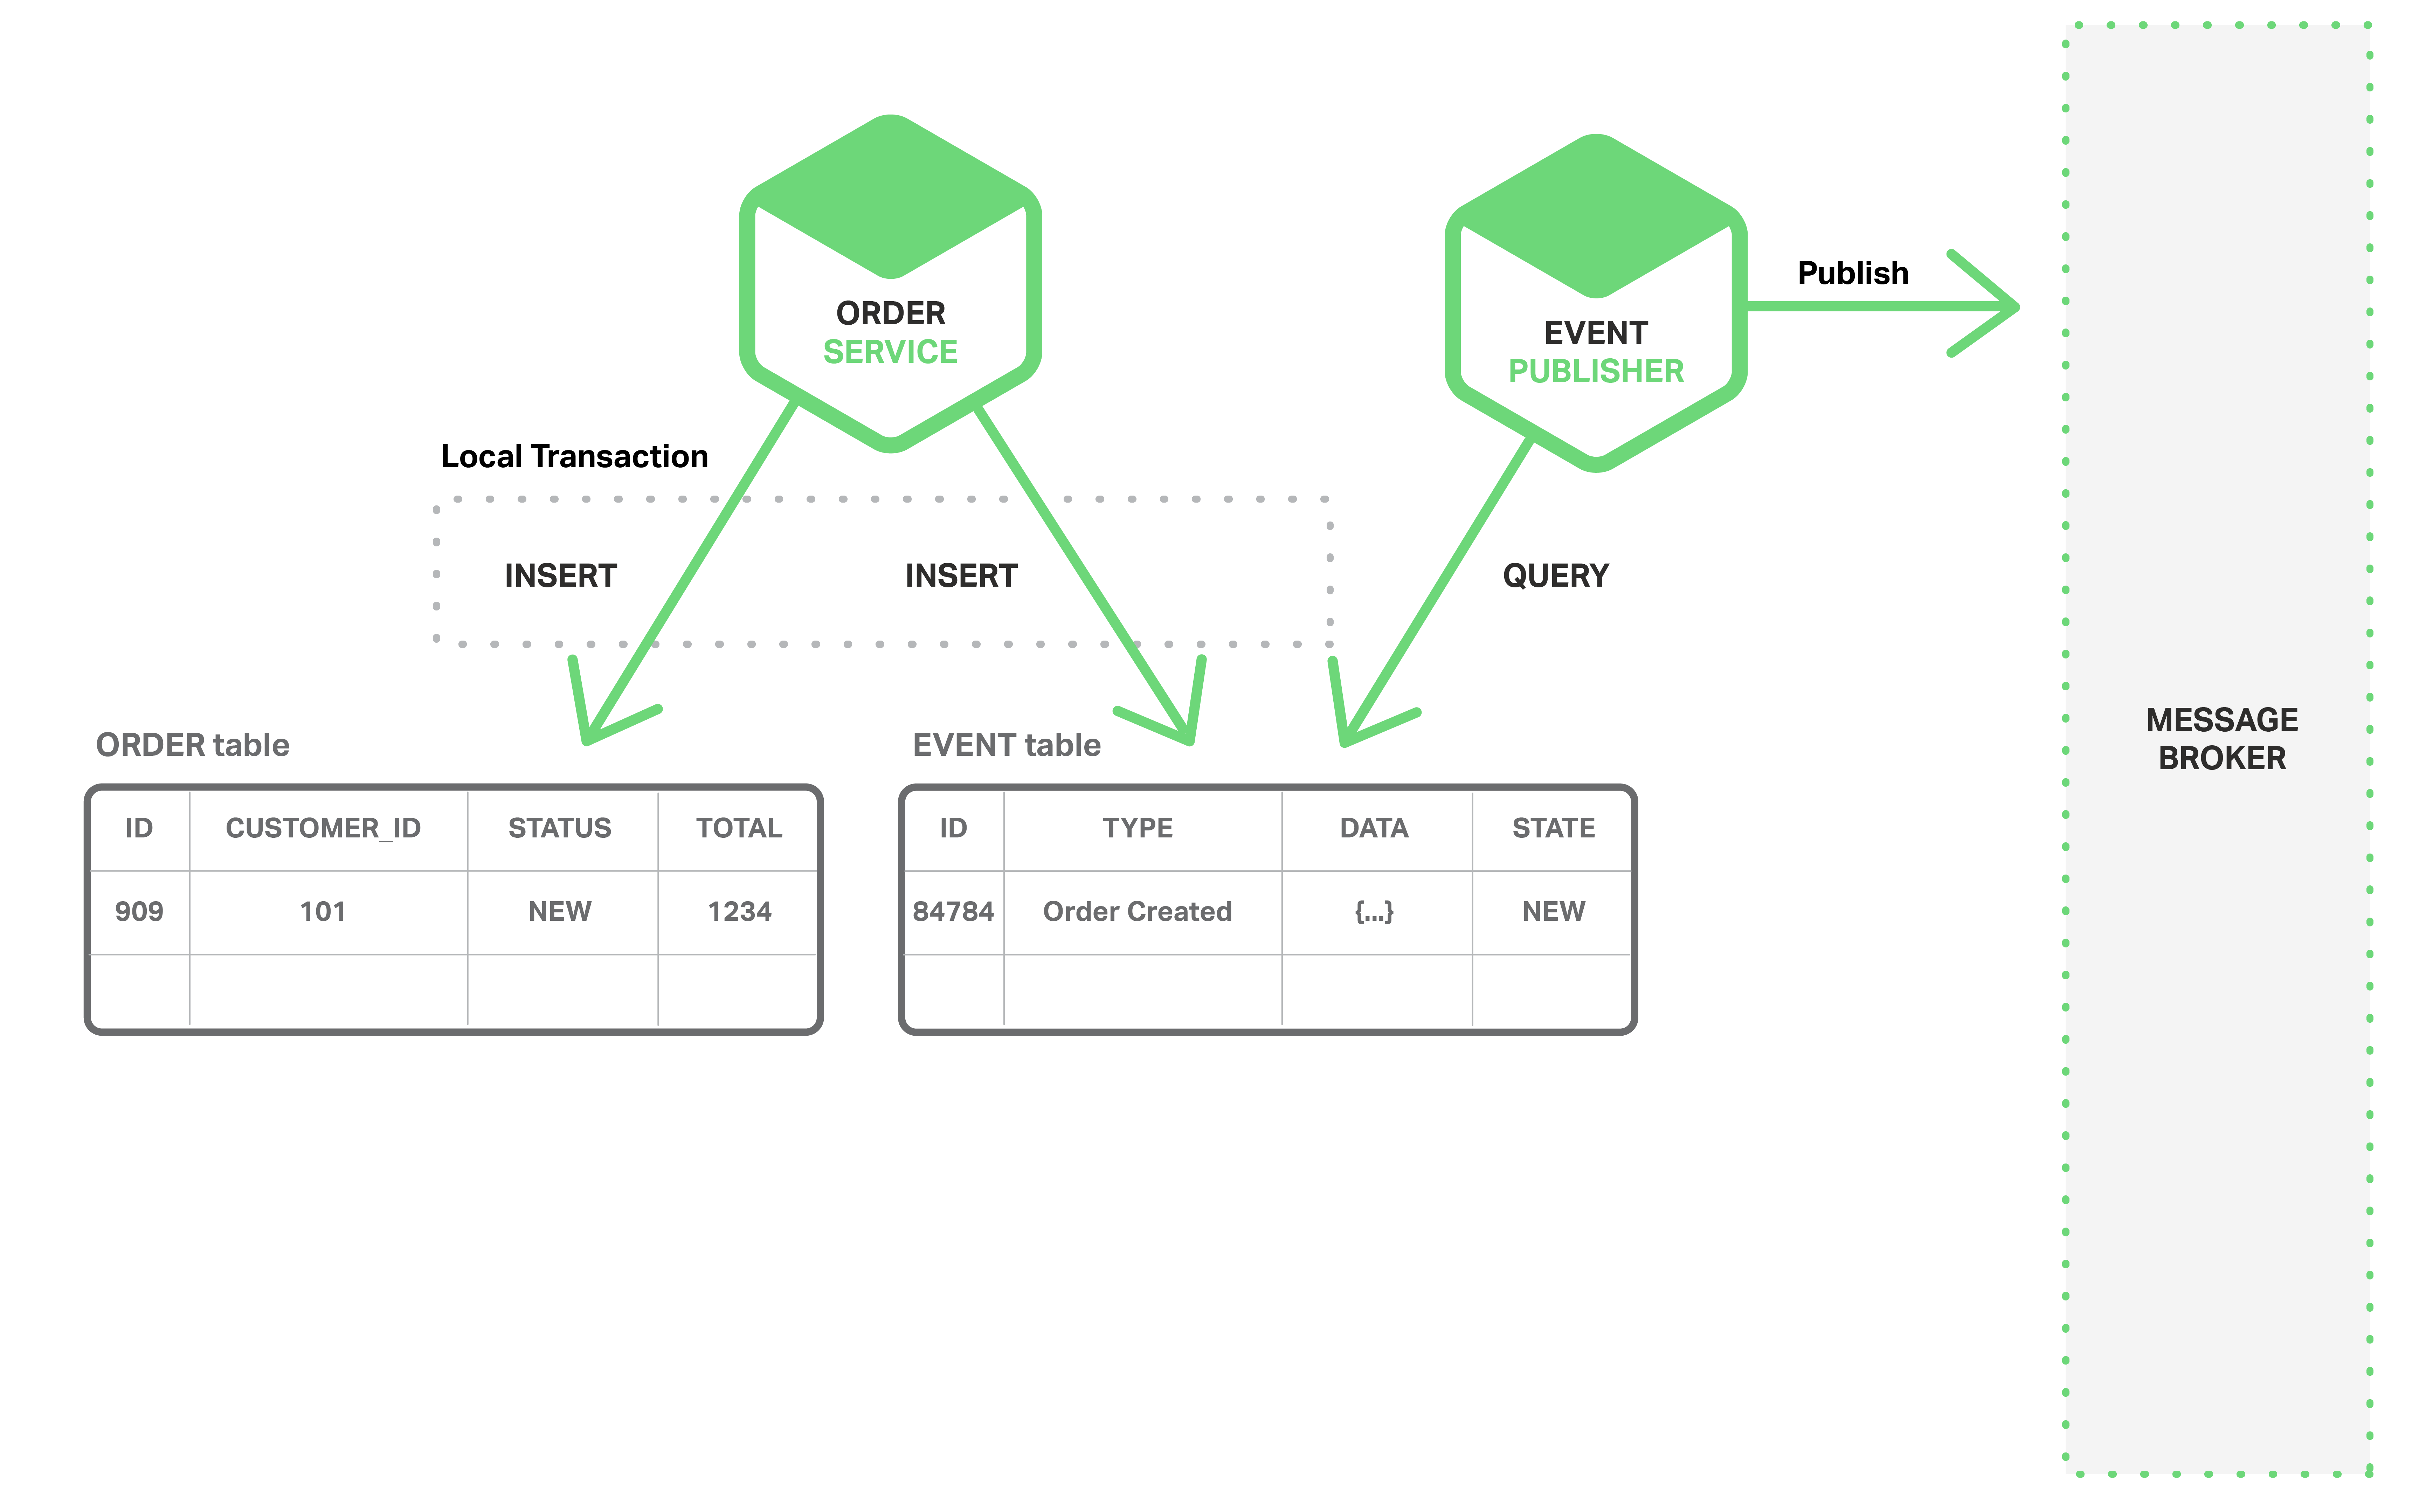 In a microservice architecture, achieve atomicity by using only local transactions to publish events